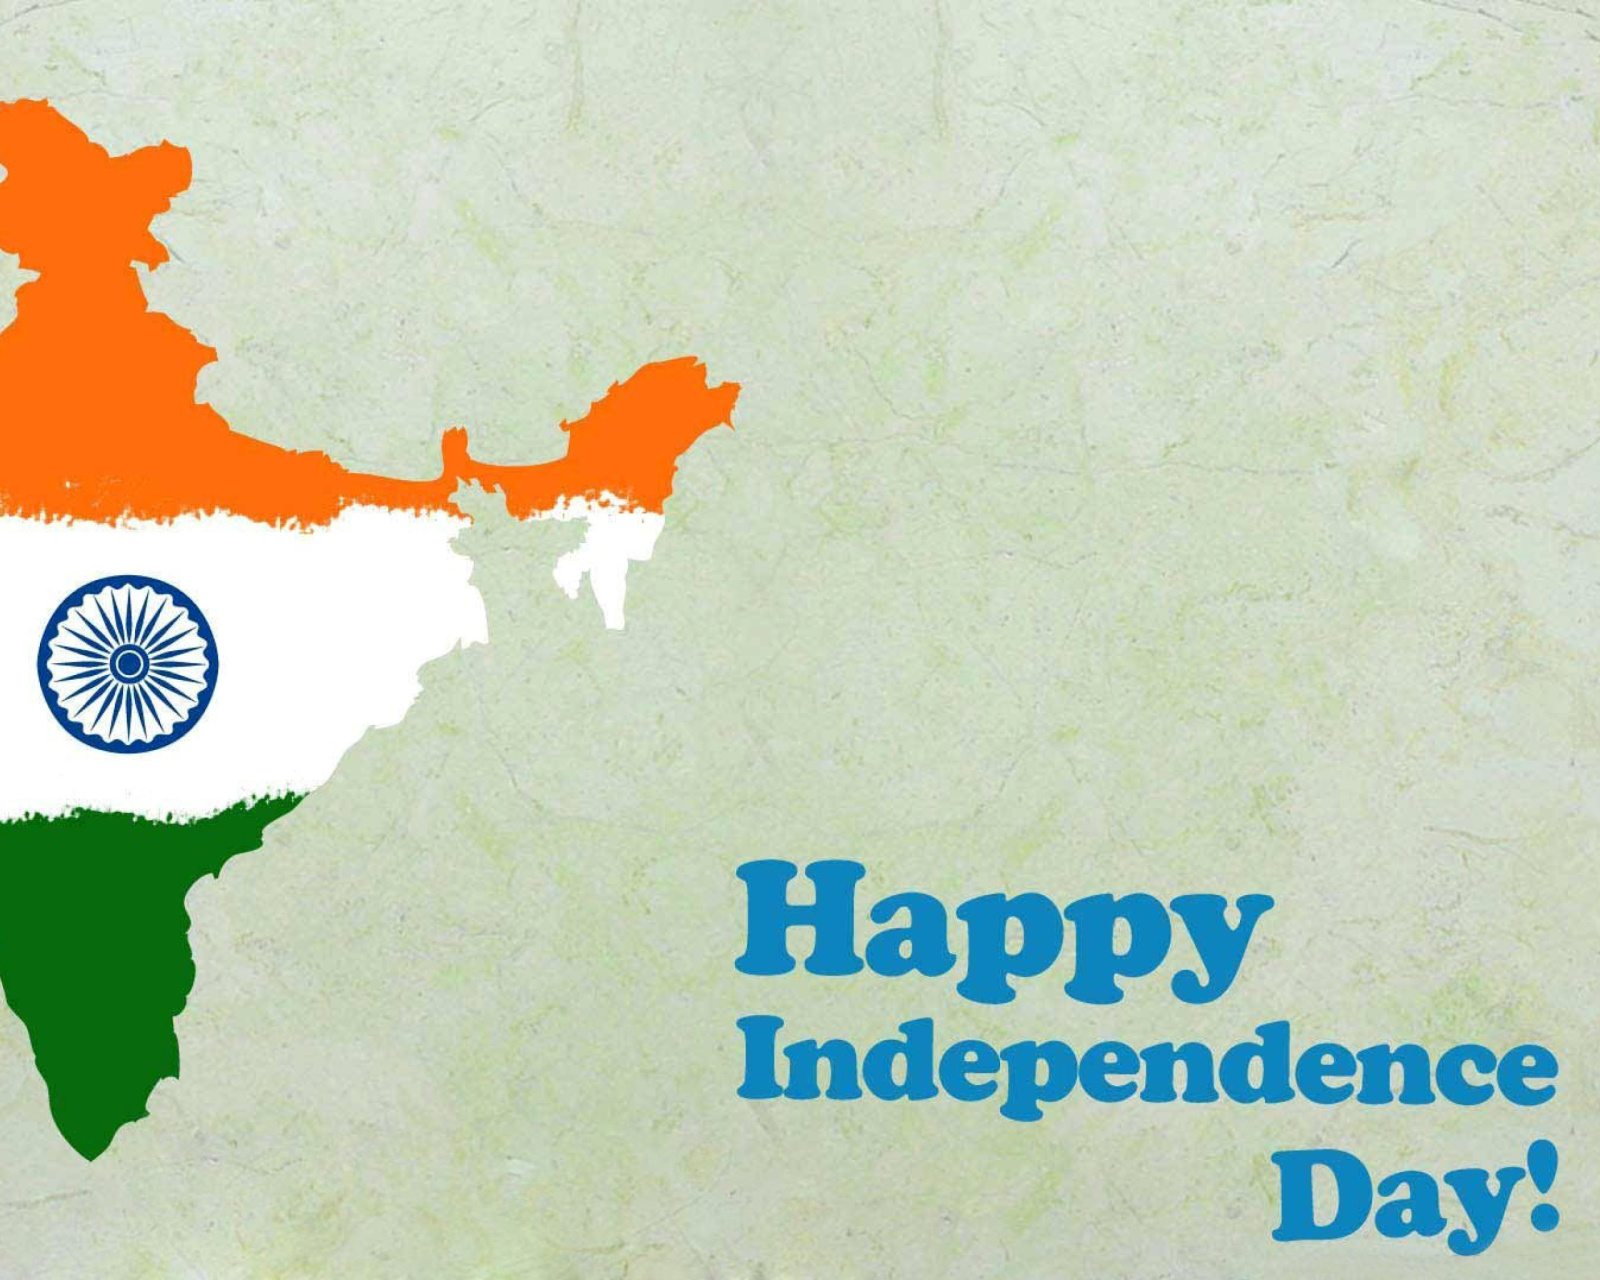 Happy Independence Day India wallpaper 1600x1280